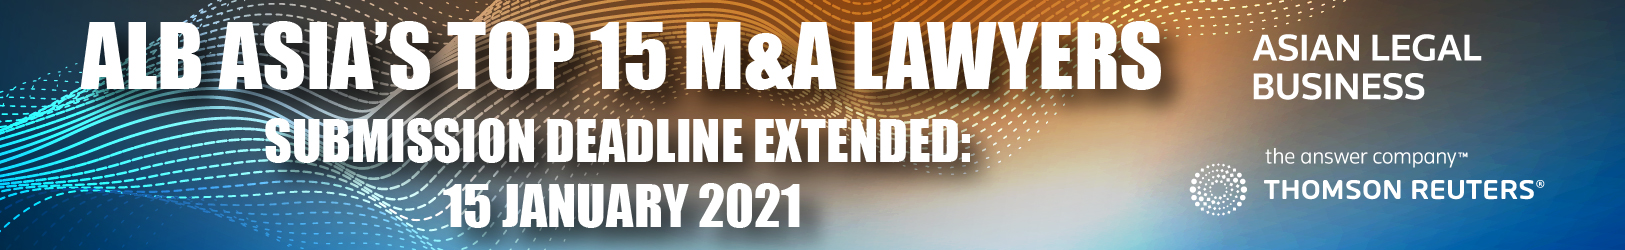 ALB Asia's Top M&A Lawyers 2021